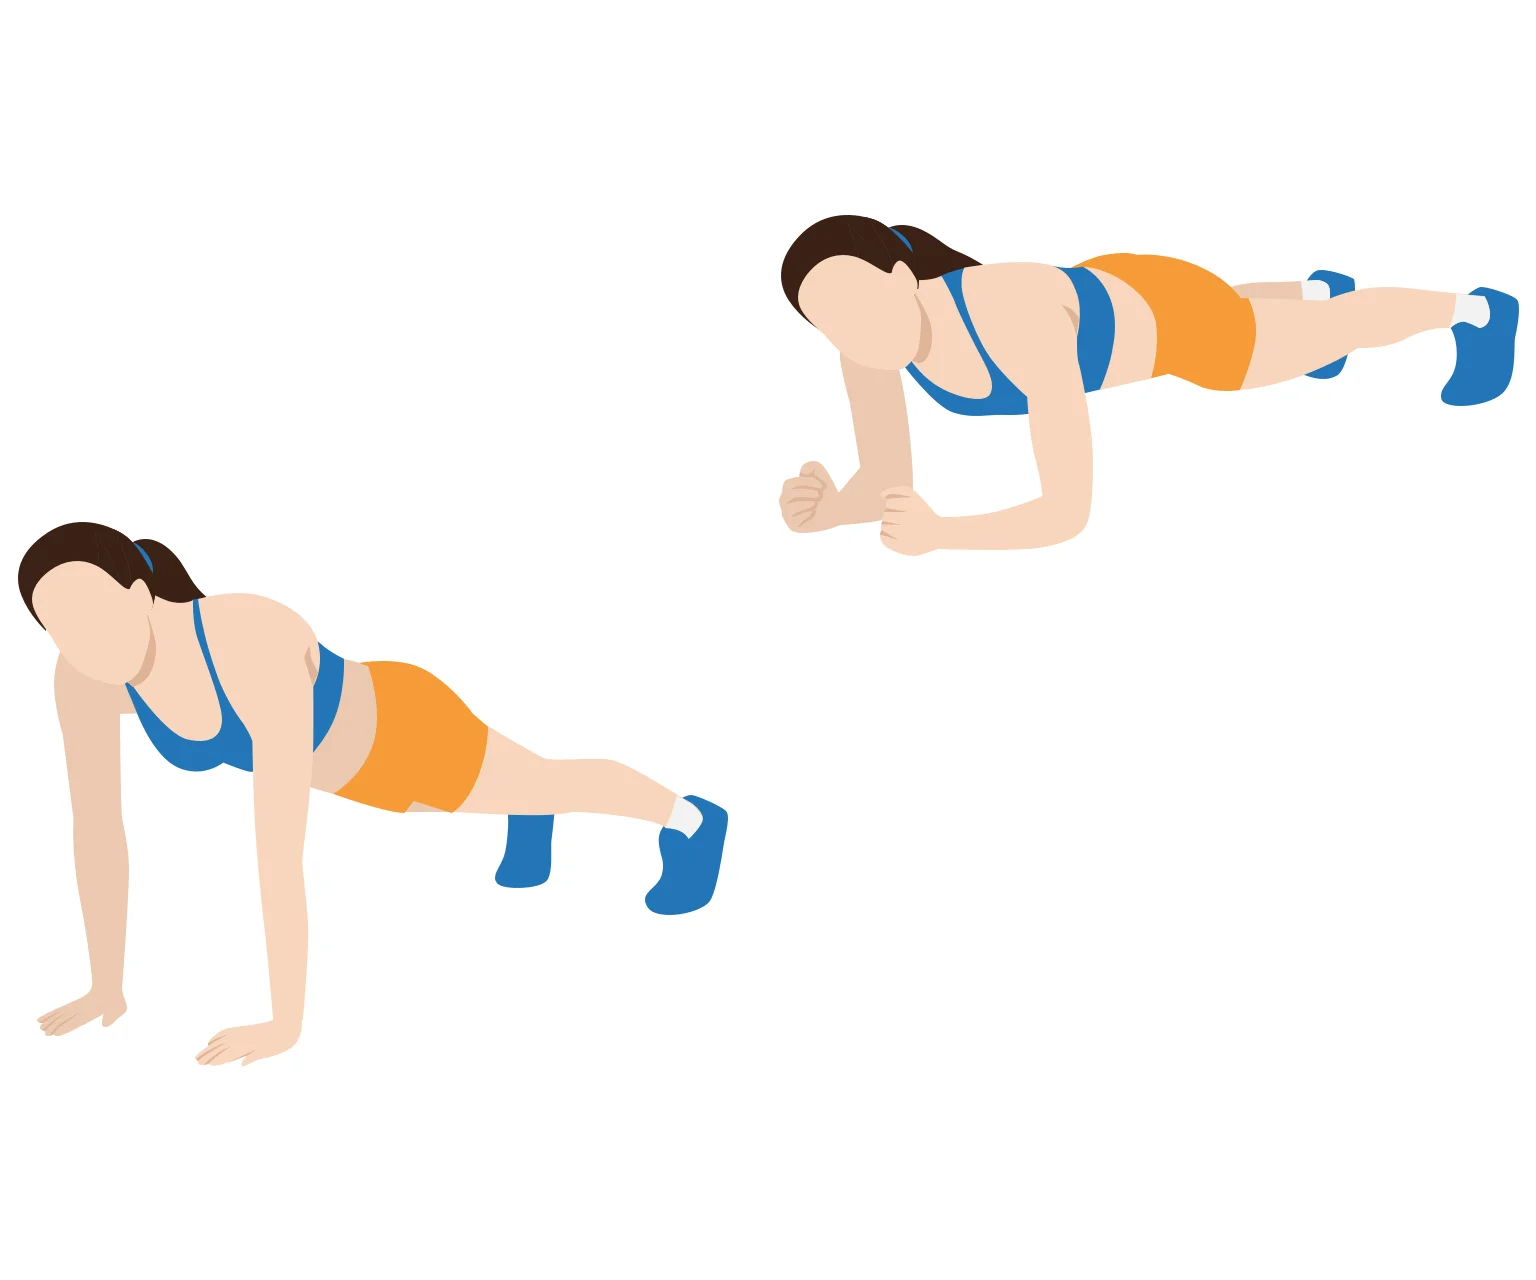 diagram - How to do an up-down plank